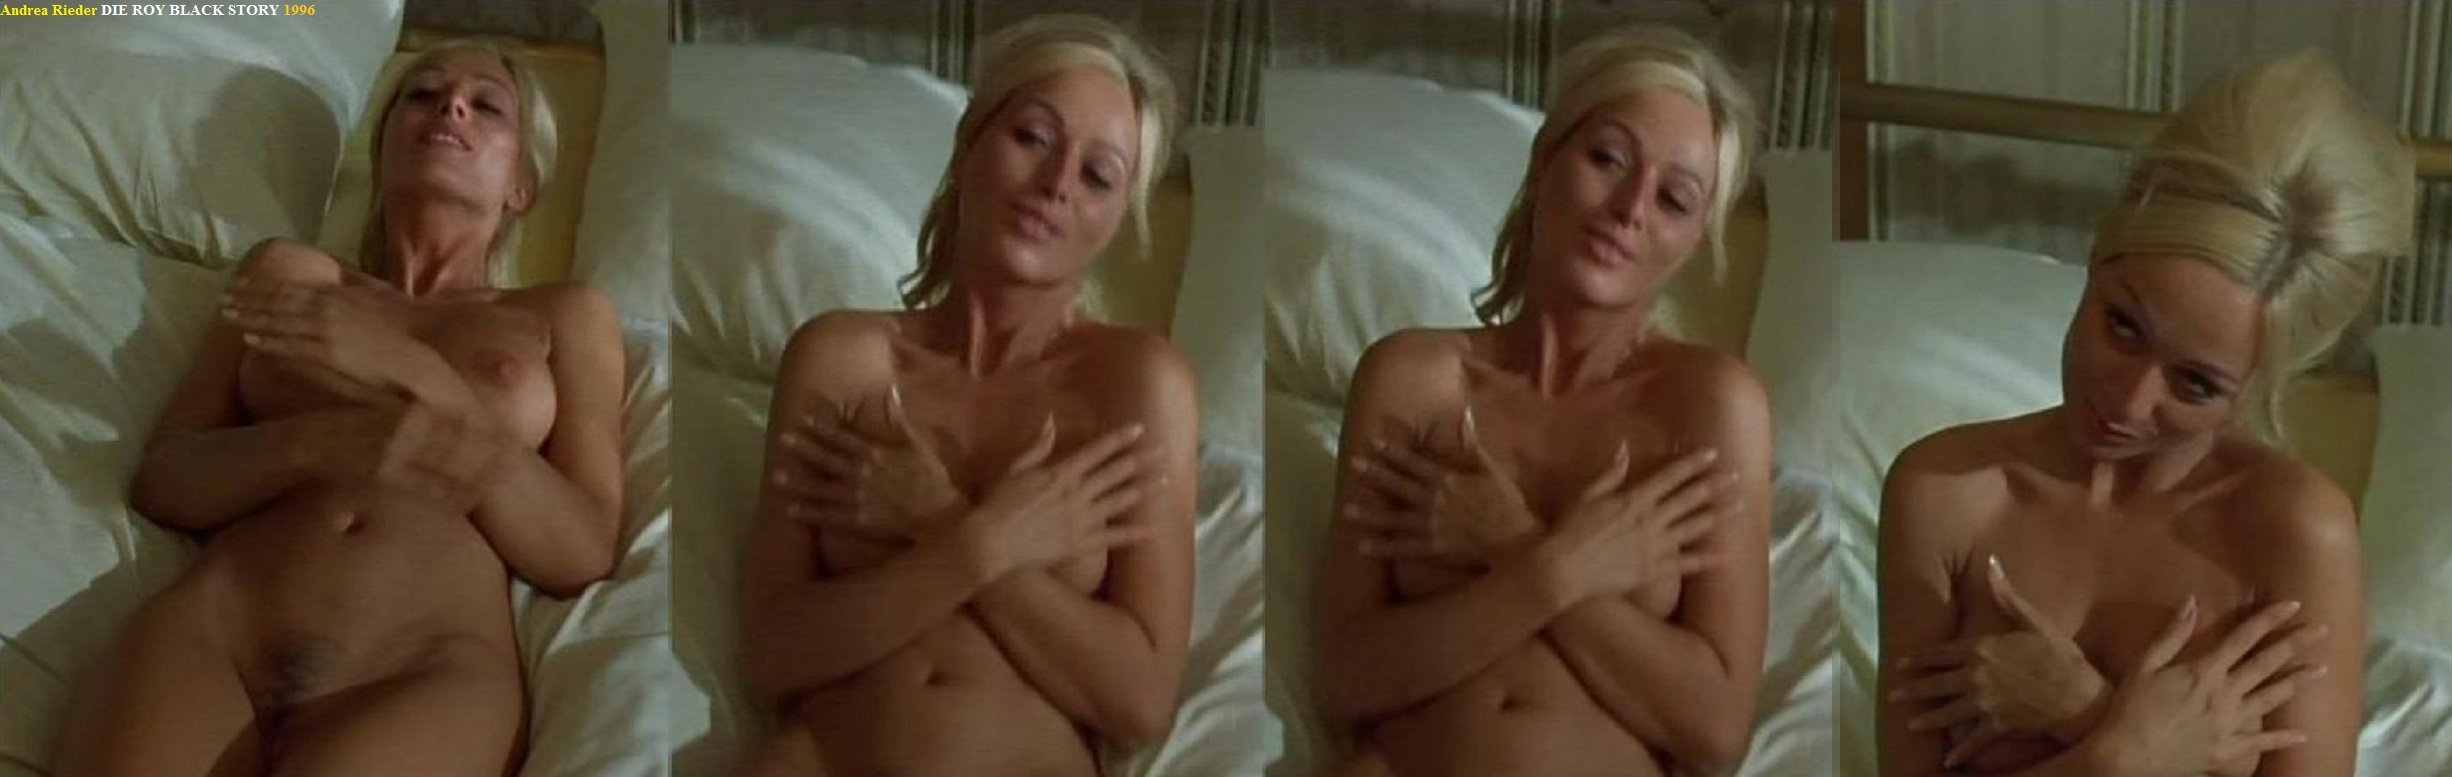 Andrea anders naked